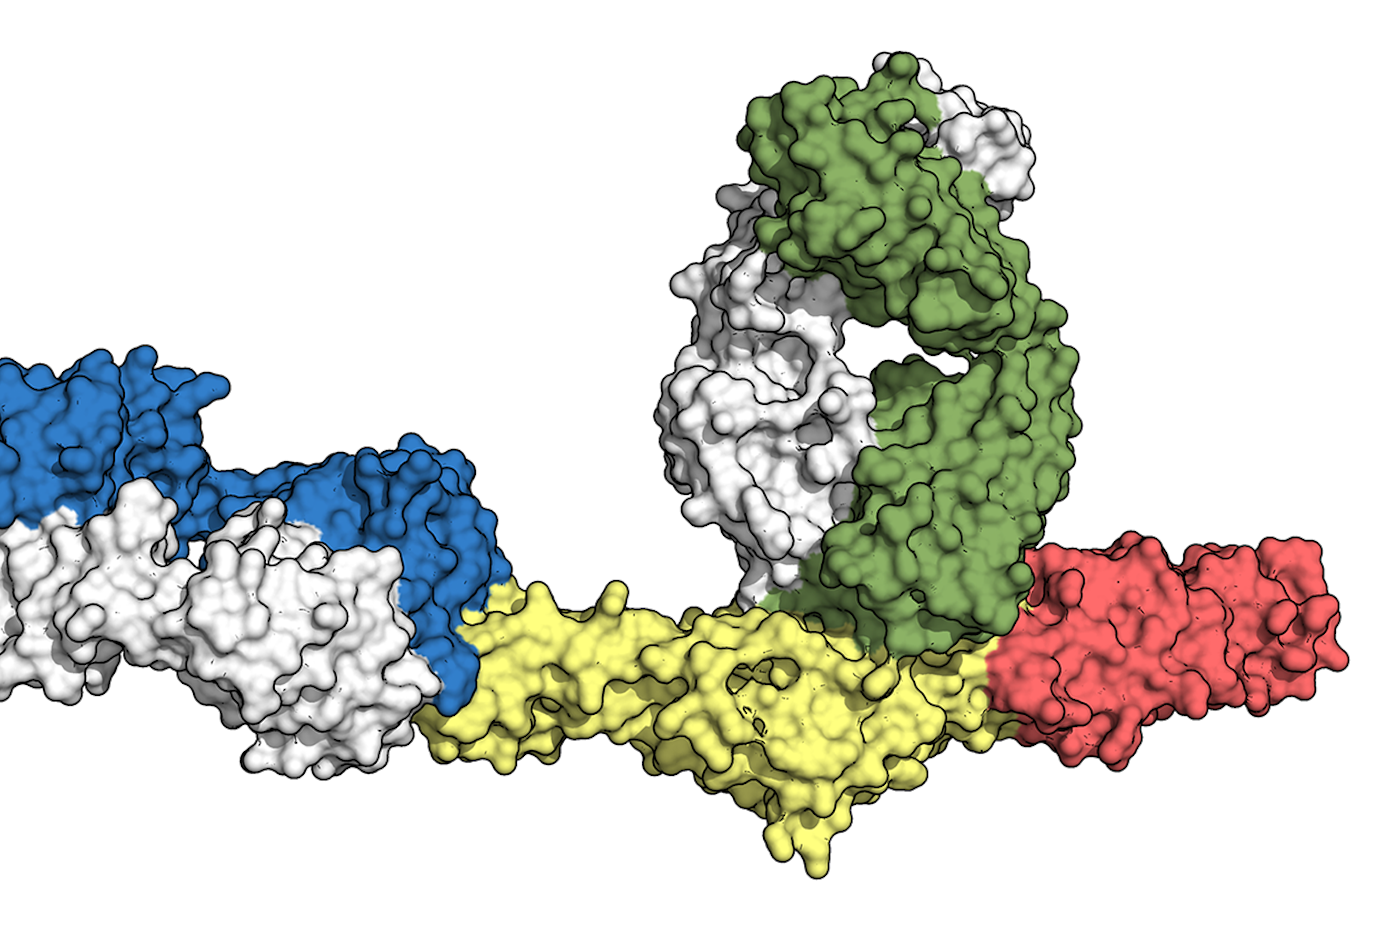 3D atomic map, or structure, of the Gc protein bound to two antibodies 